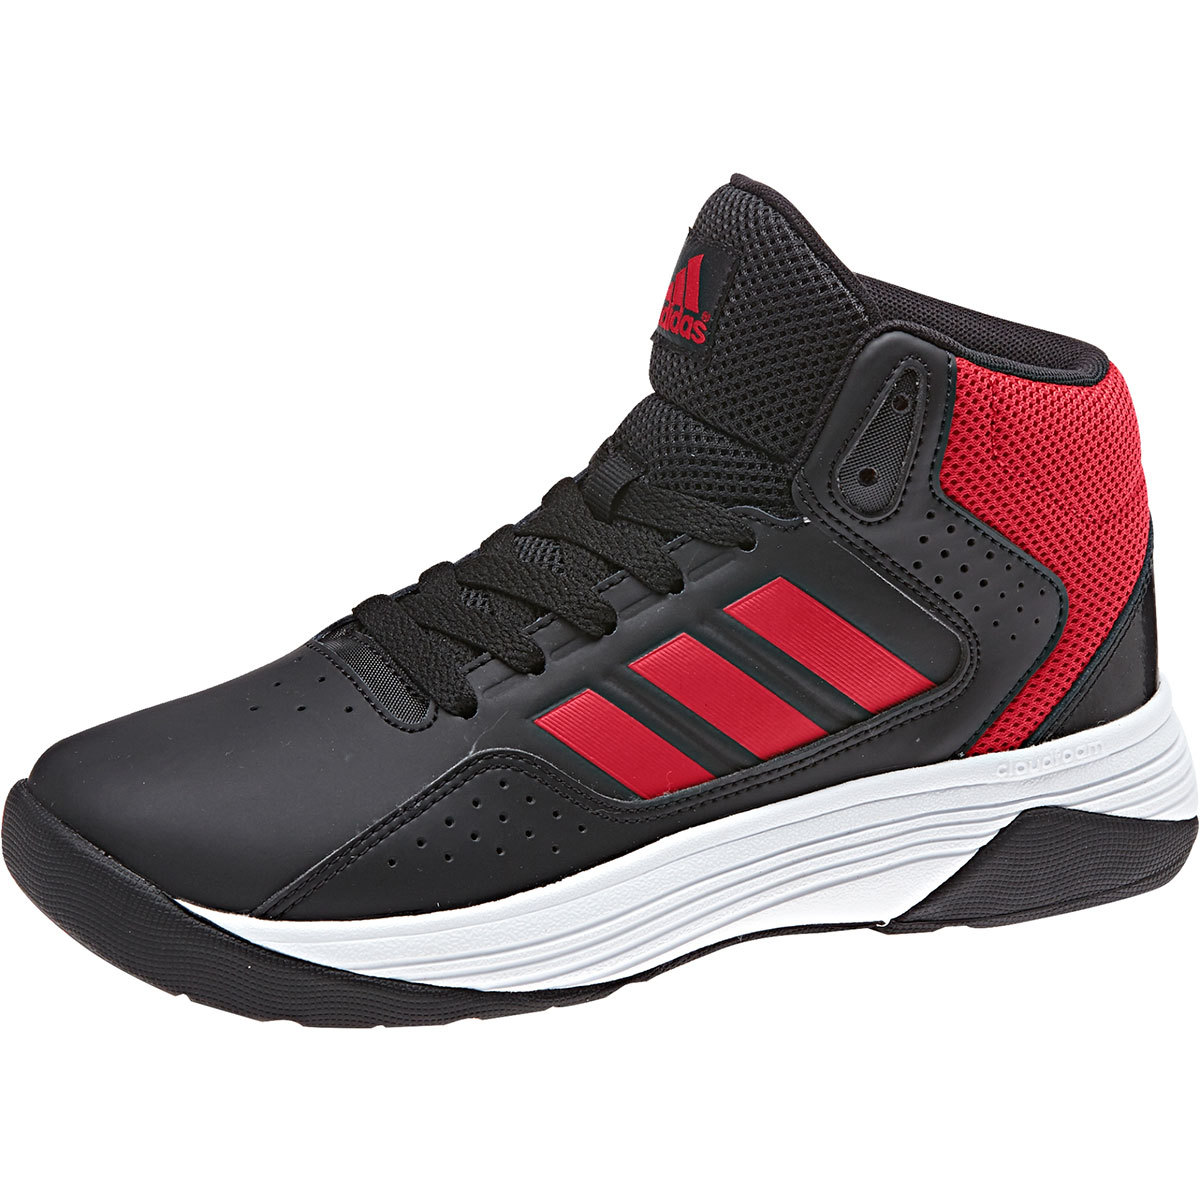 red and black adidas basketball shoes